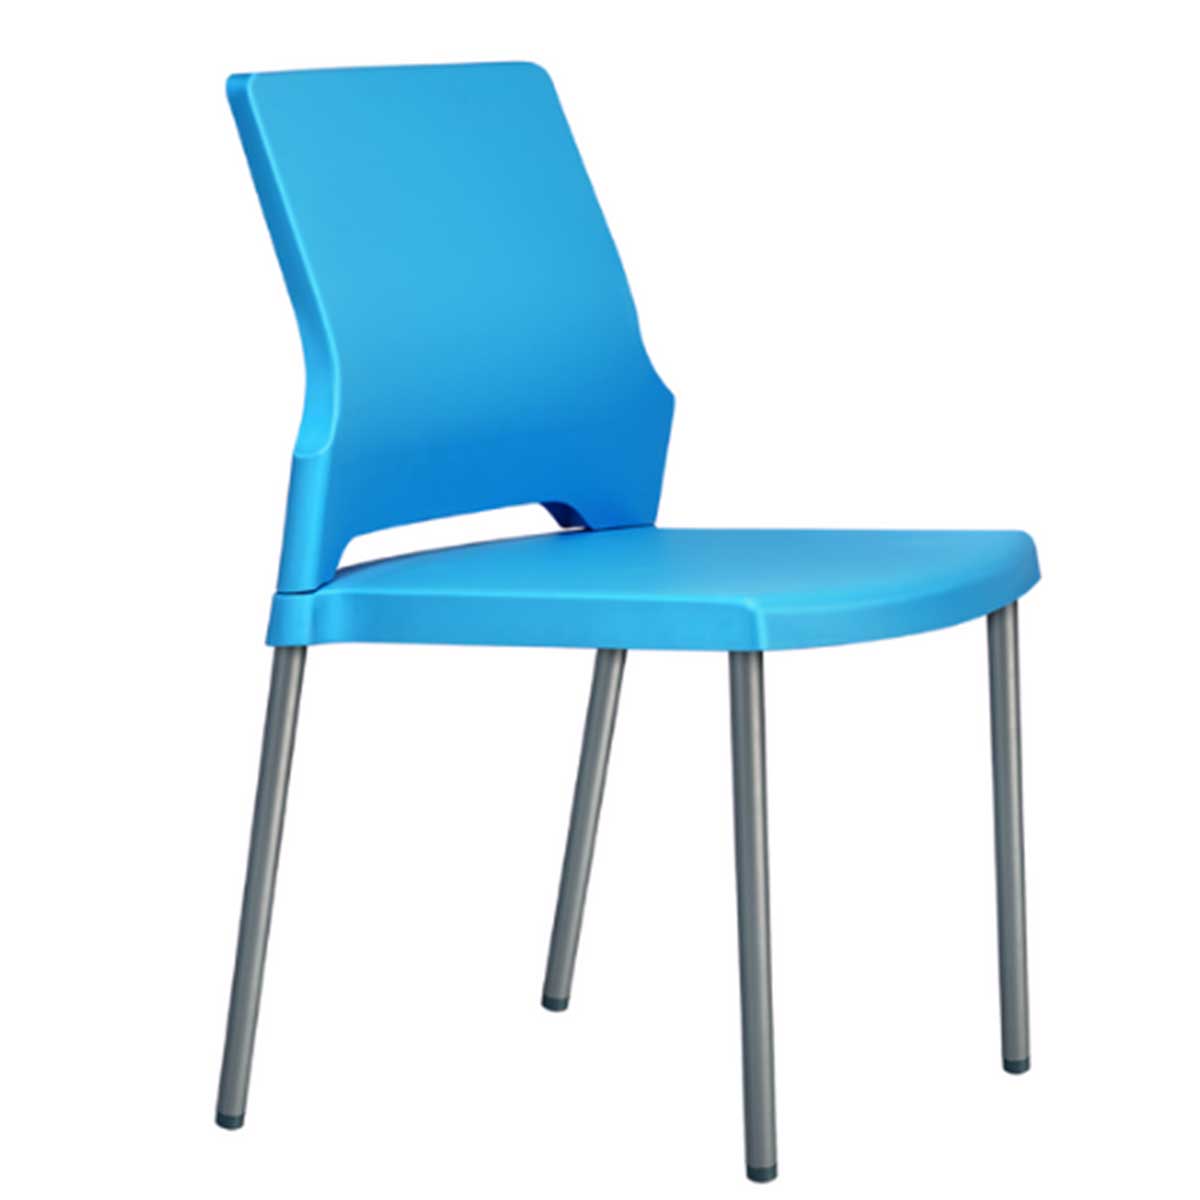 Cafeteria Chair Manufacturers, Suppliers in Pitampura